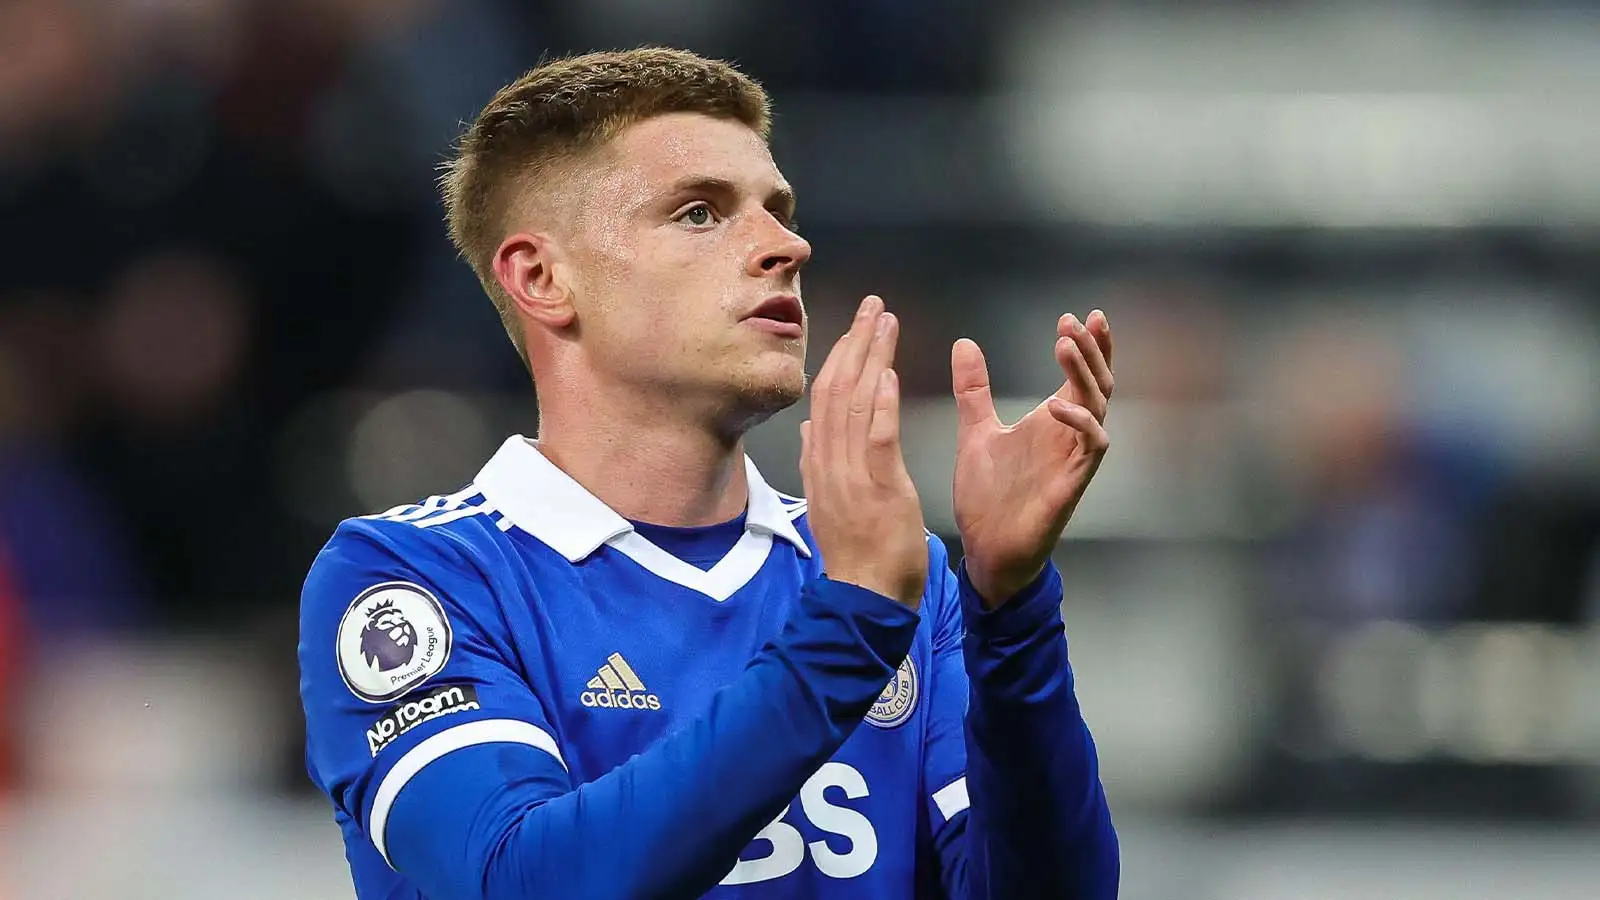 Harvey Barnes #7 of Leicester City applauds the fans